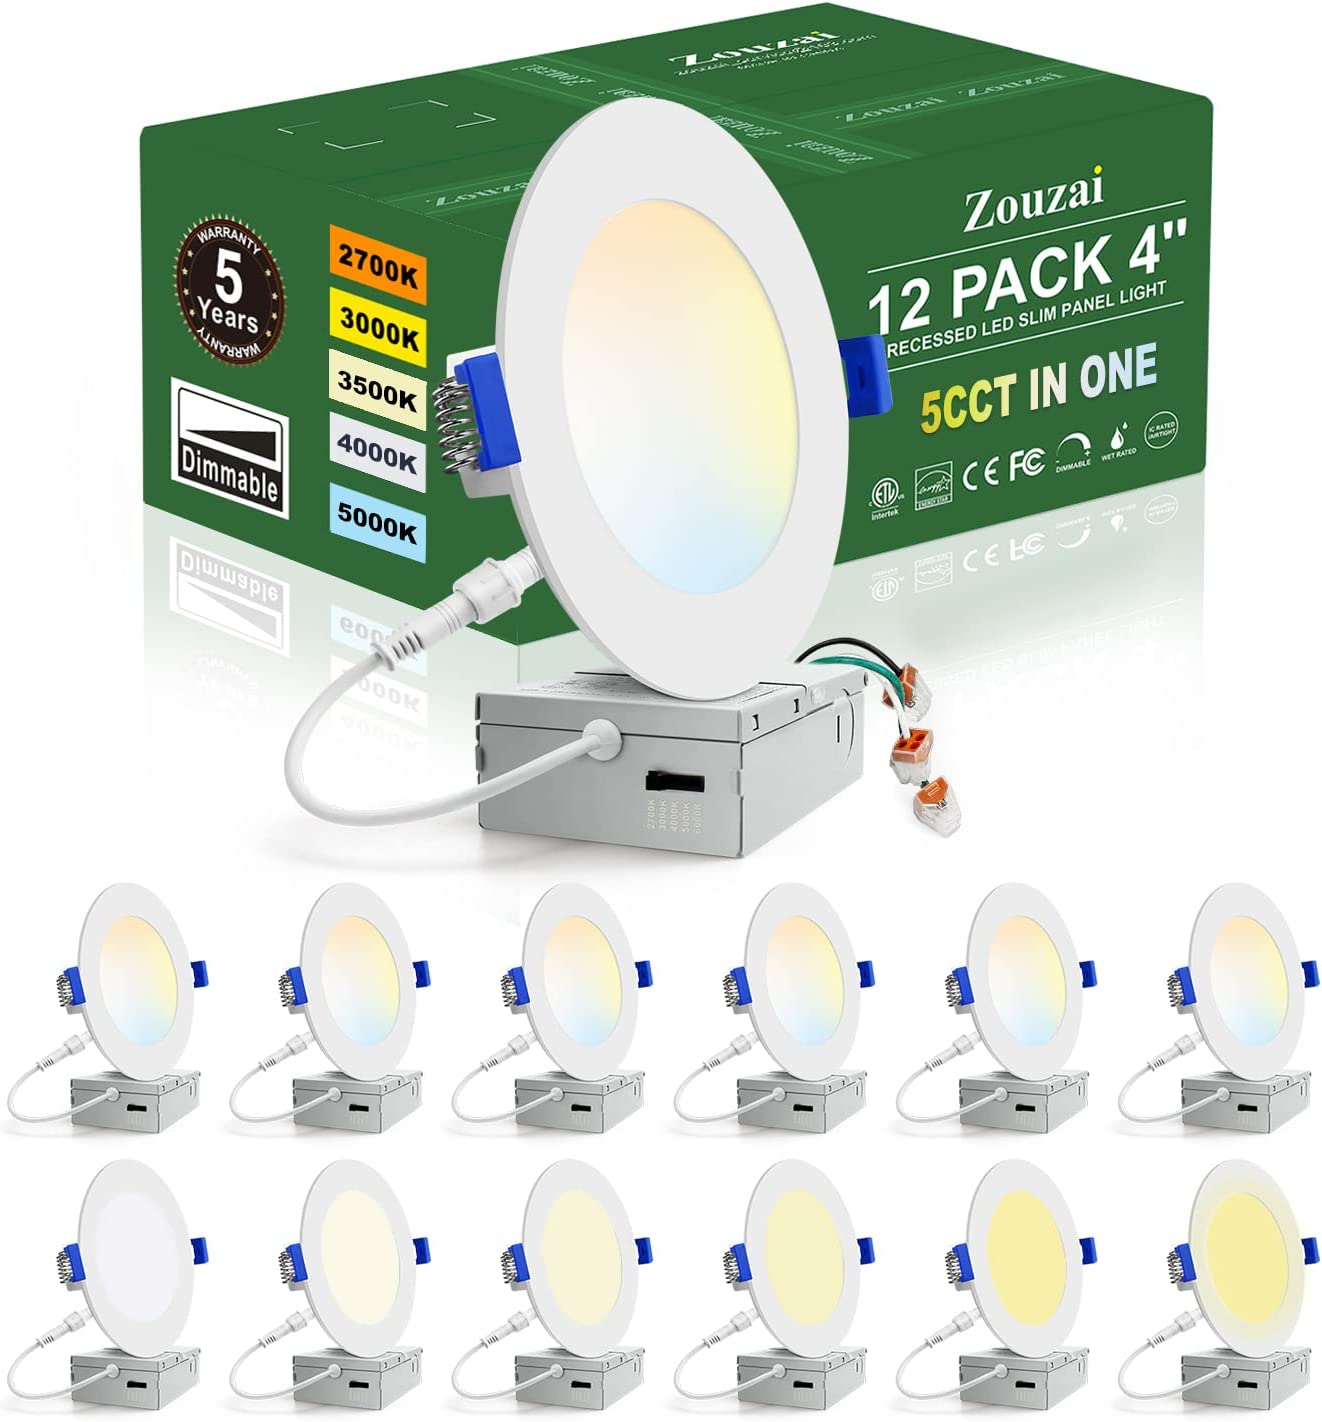 zouzai 12 Pack 4 Inch 5CCT Ultra-Thin LED Recessed [...]